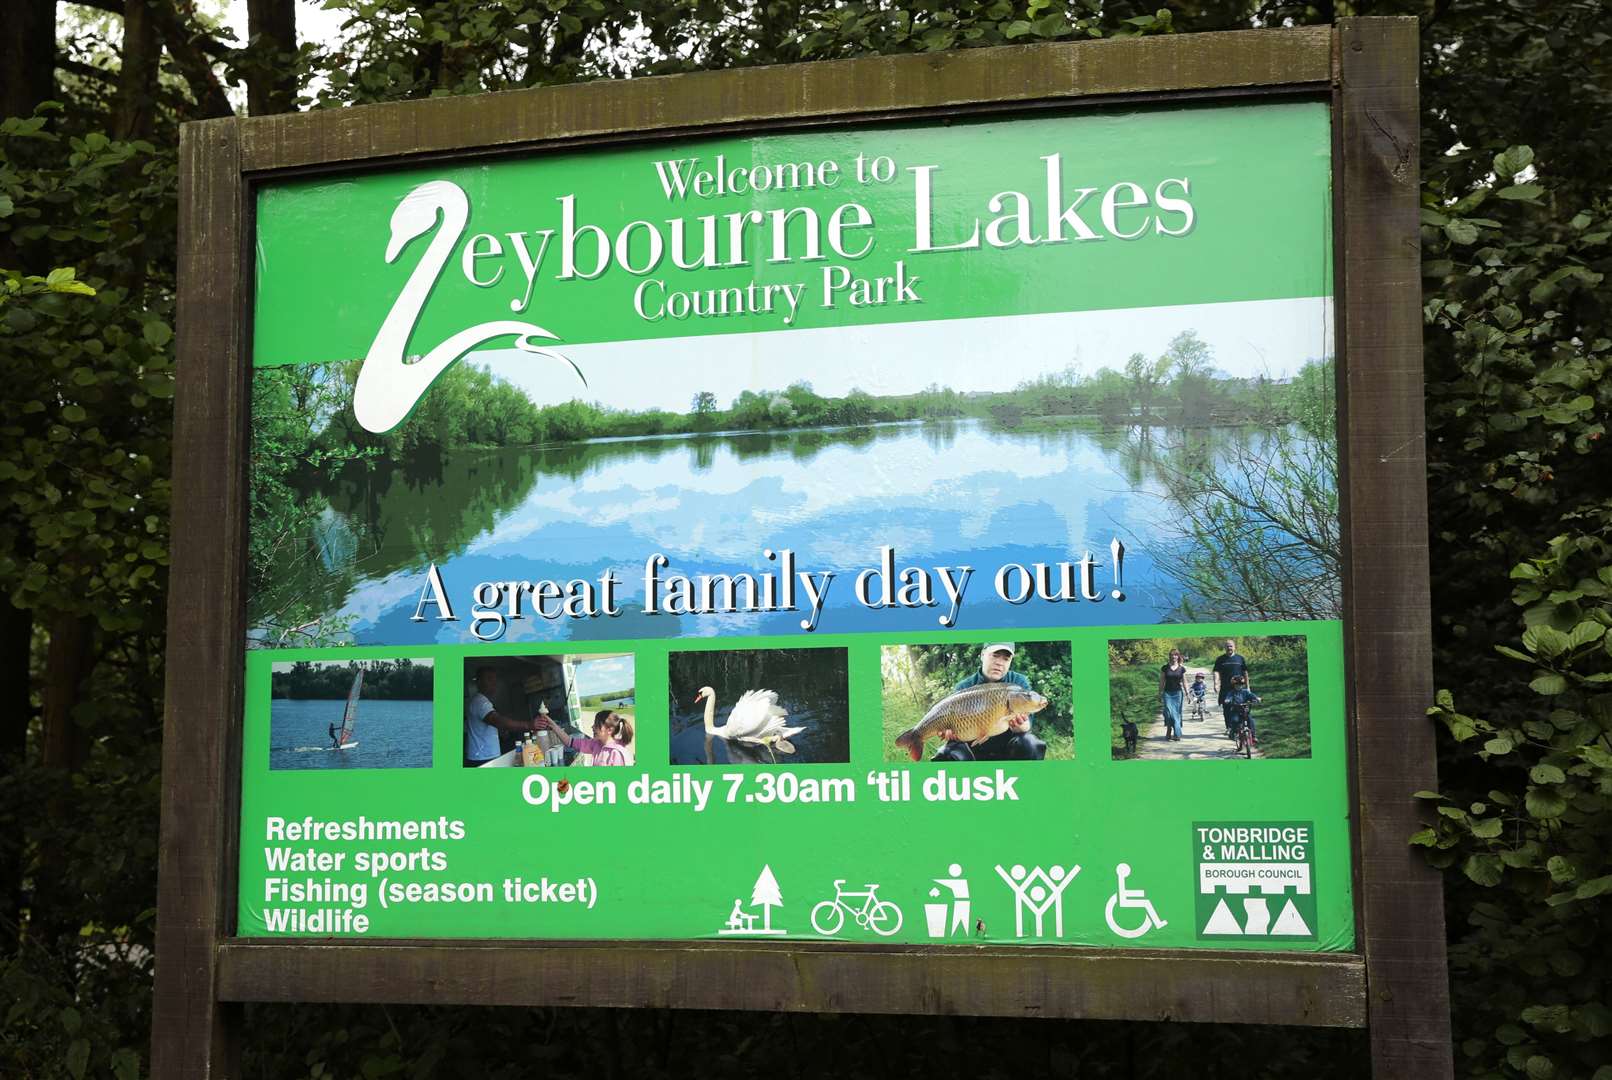 The Leybourne Lakes Café received 3,500 signatures in its last petition. Picture: Martin Apps